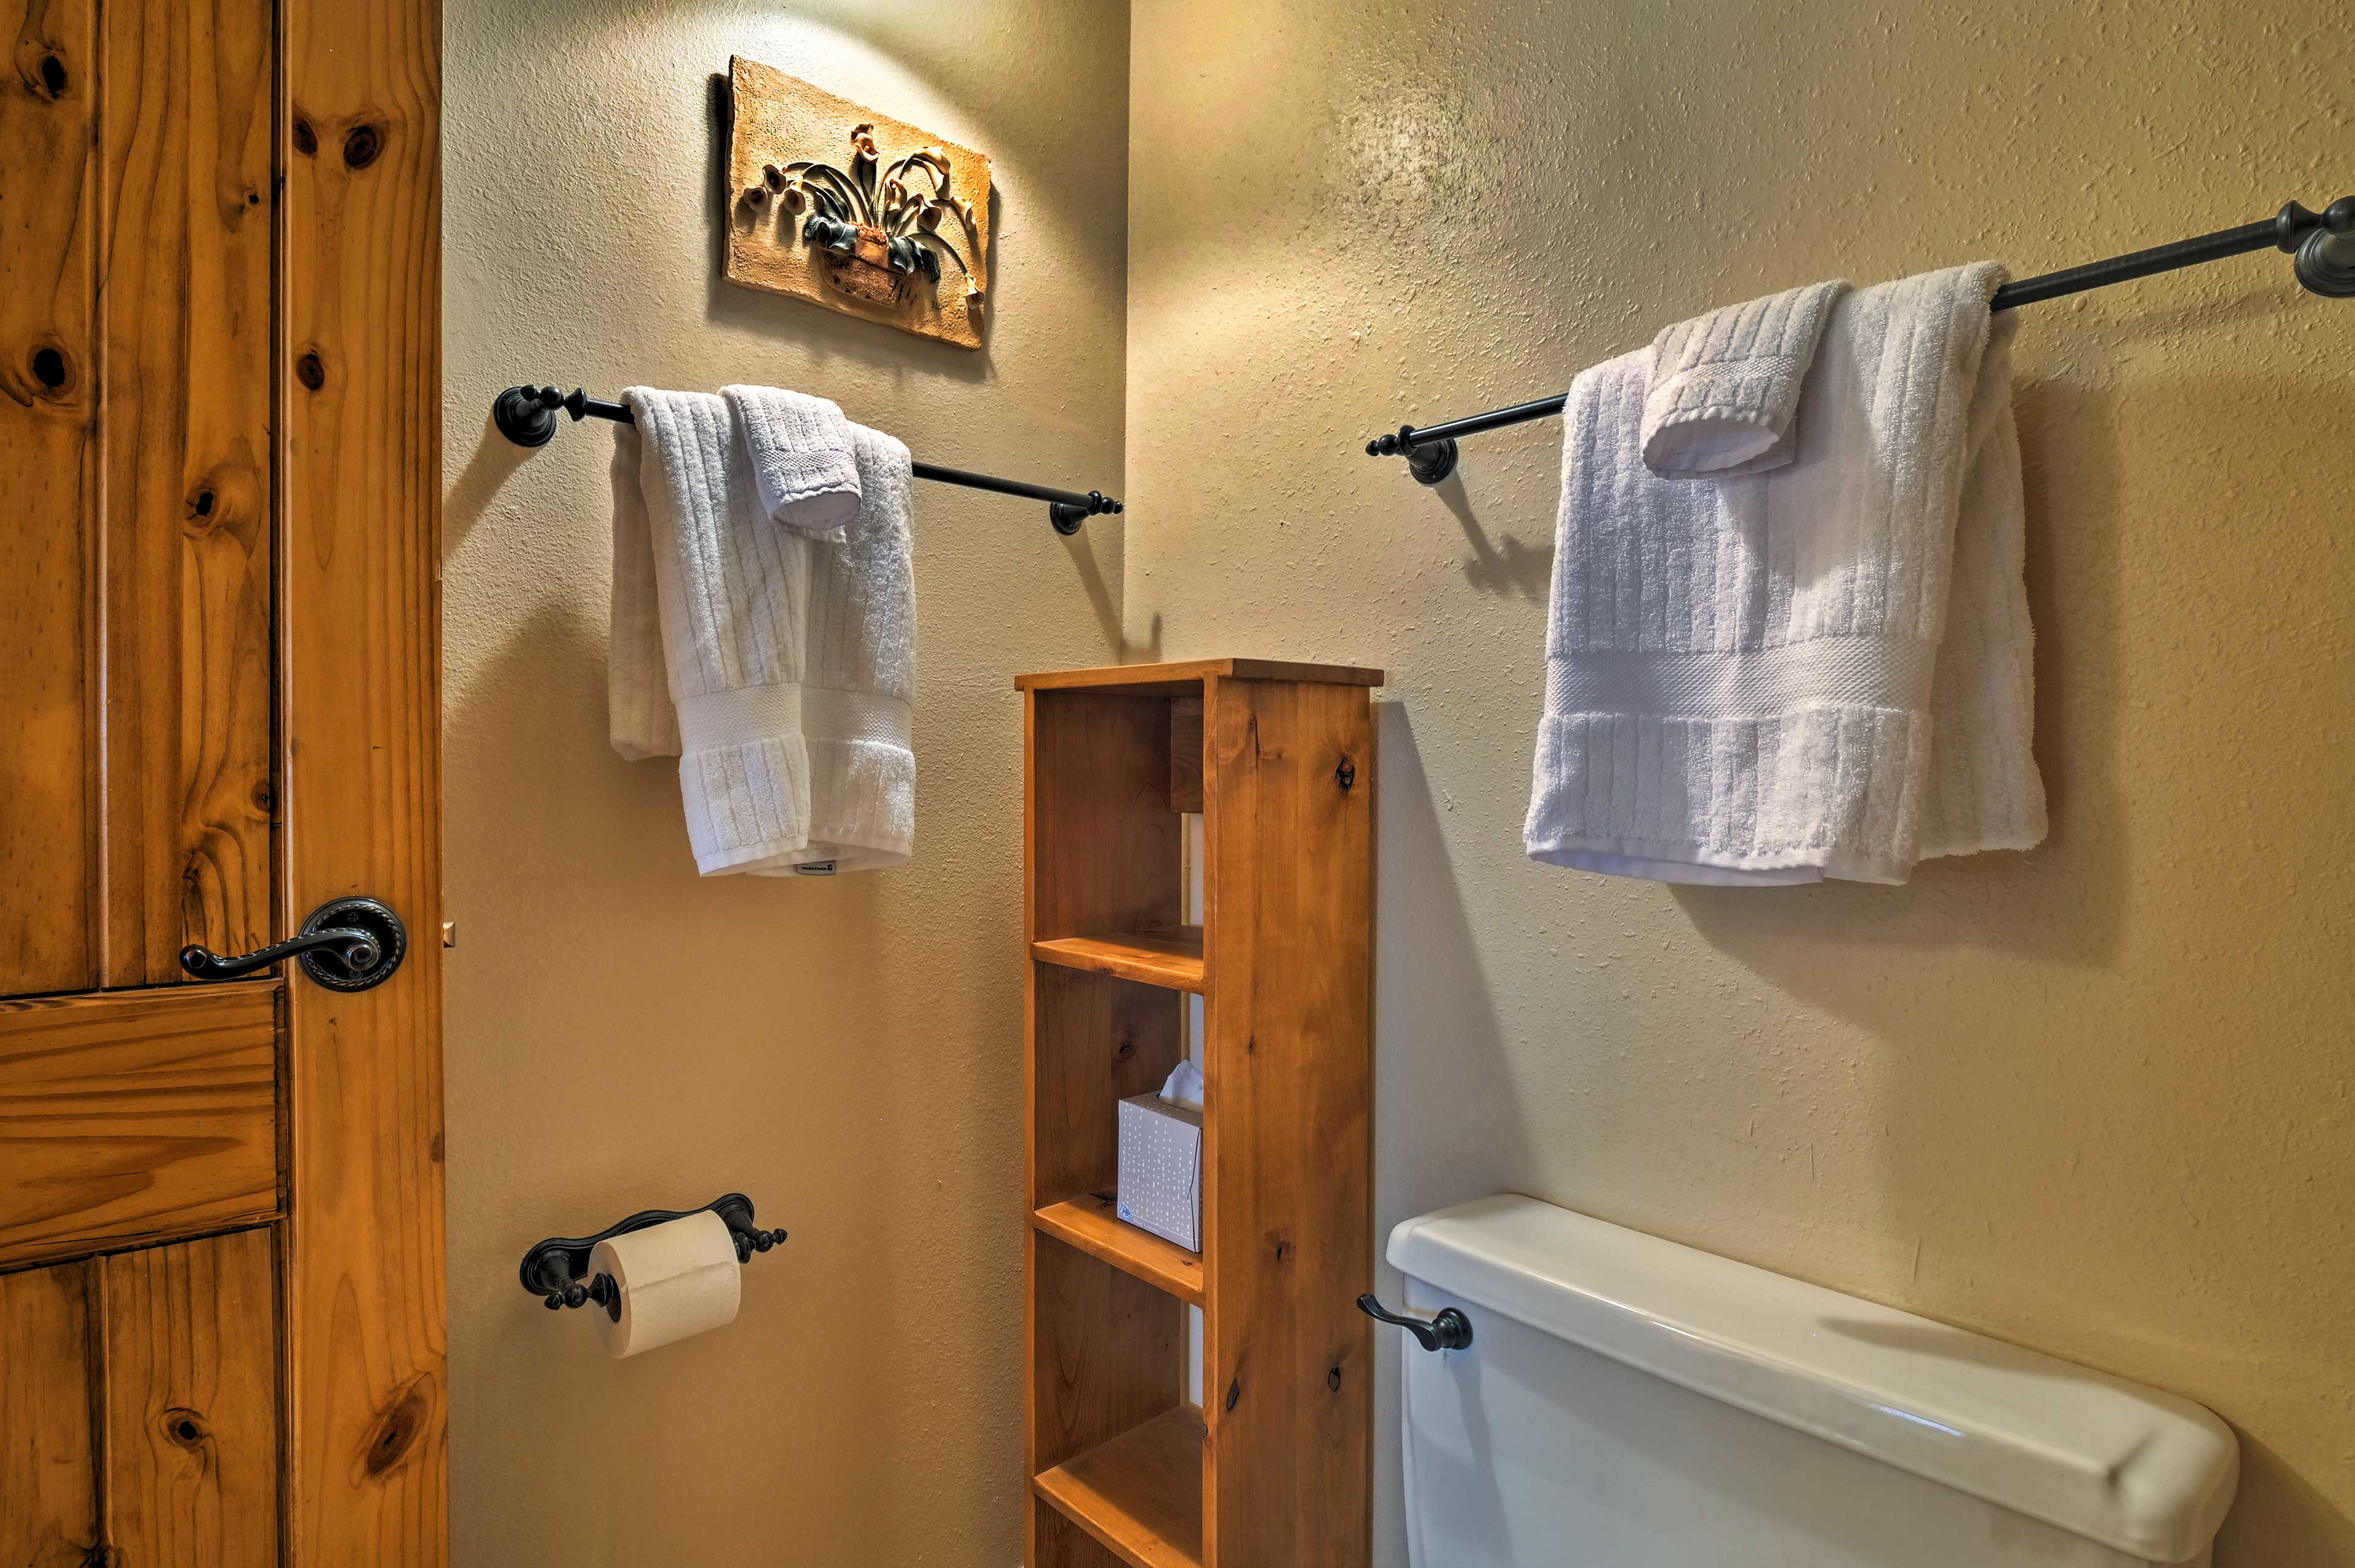 Fresh towels will make you feel right at home.